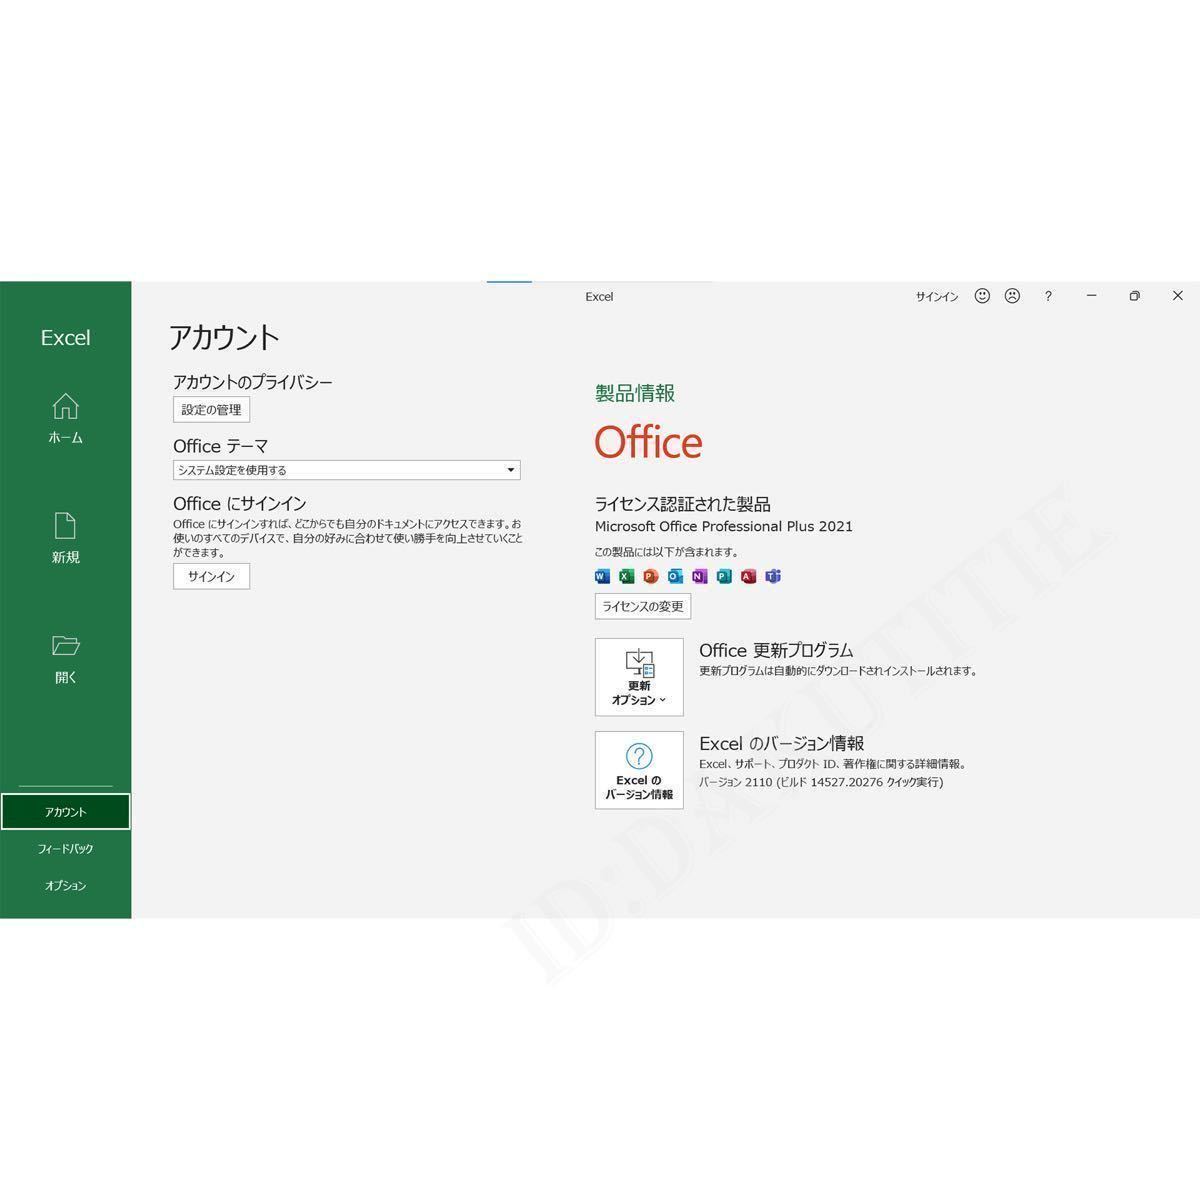 2 stand amount Microsoft Office 2021 Professional Plus office 2021 Pro duct key regular Word Excel Japanese edition manual equipped download version 5